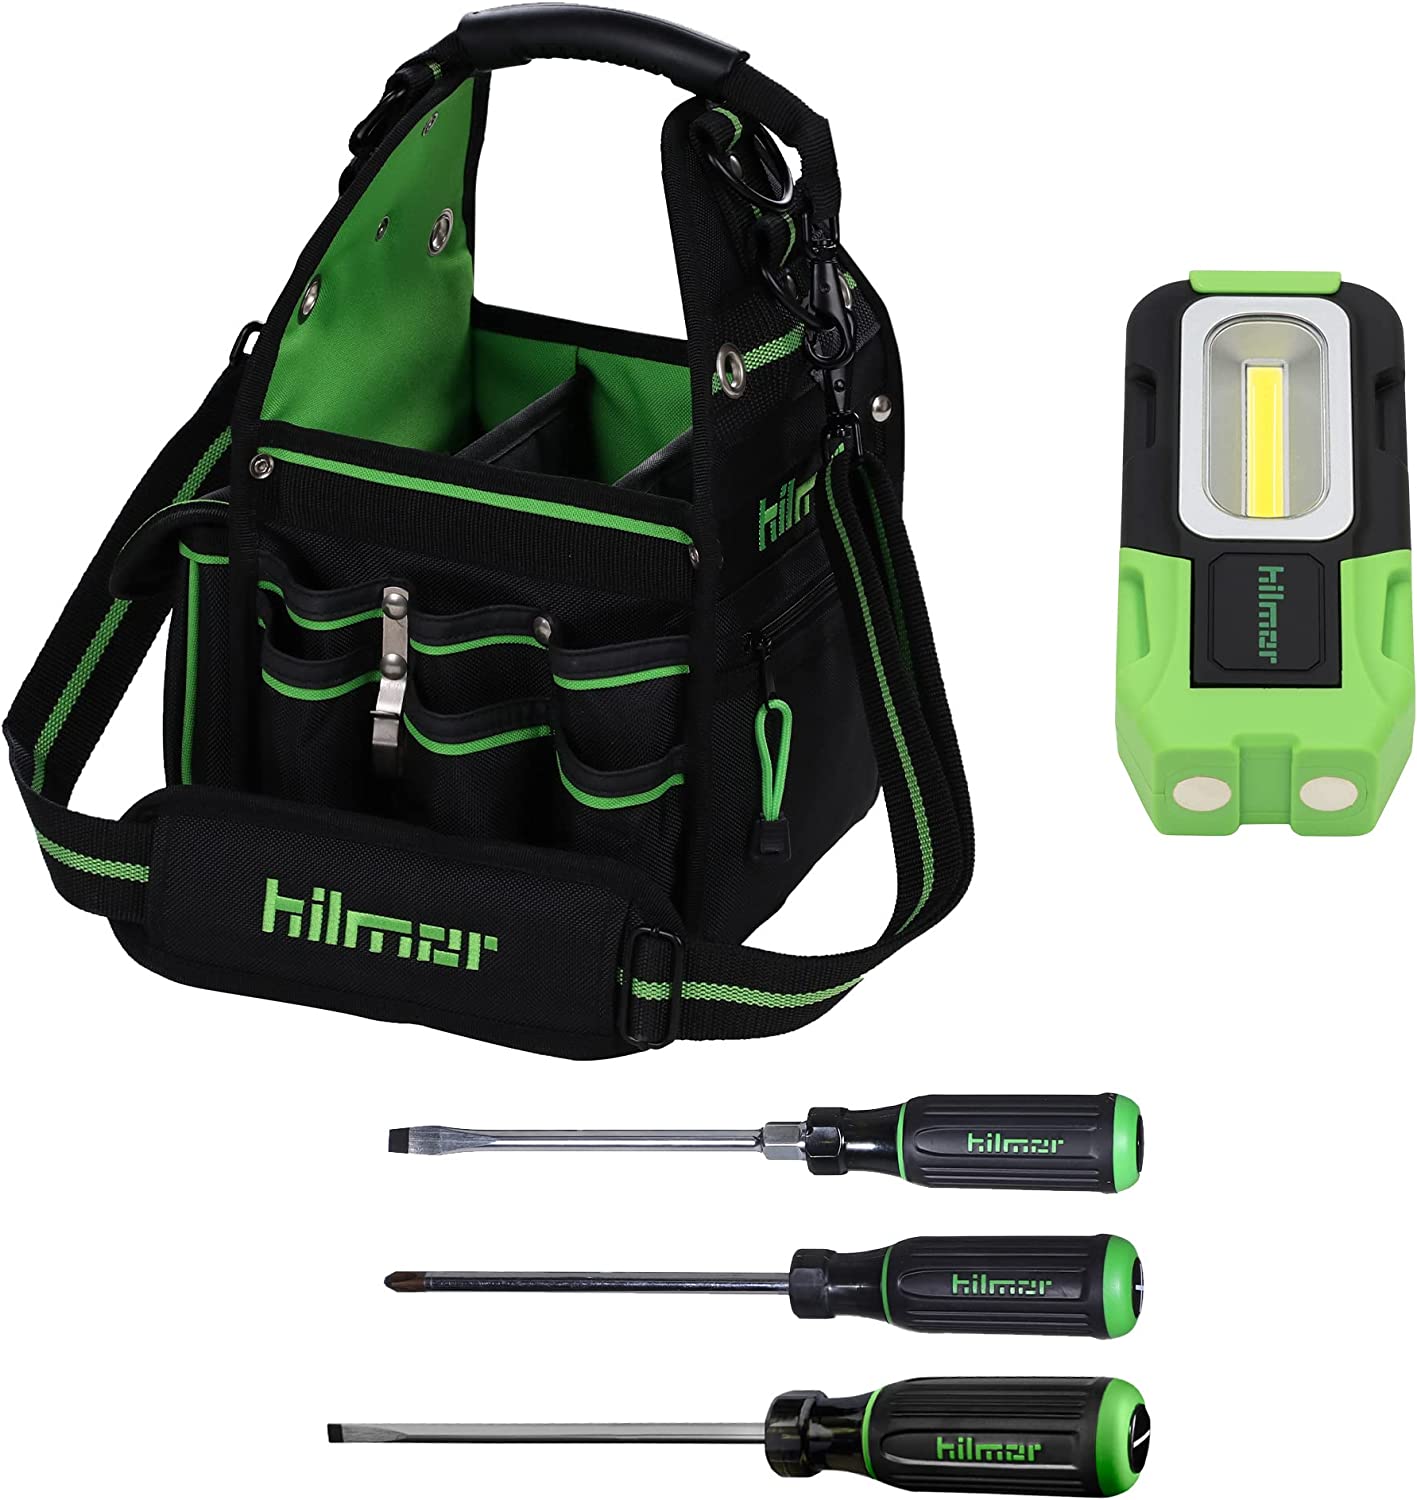 hilmor HVAC Tote Bag with Phillips, Keystone, Cabinet Tip Screwdrivers and Portable Work Light